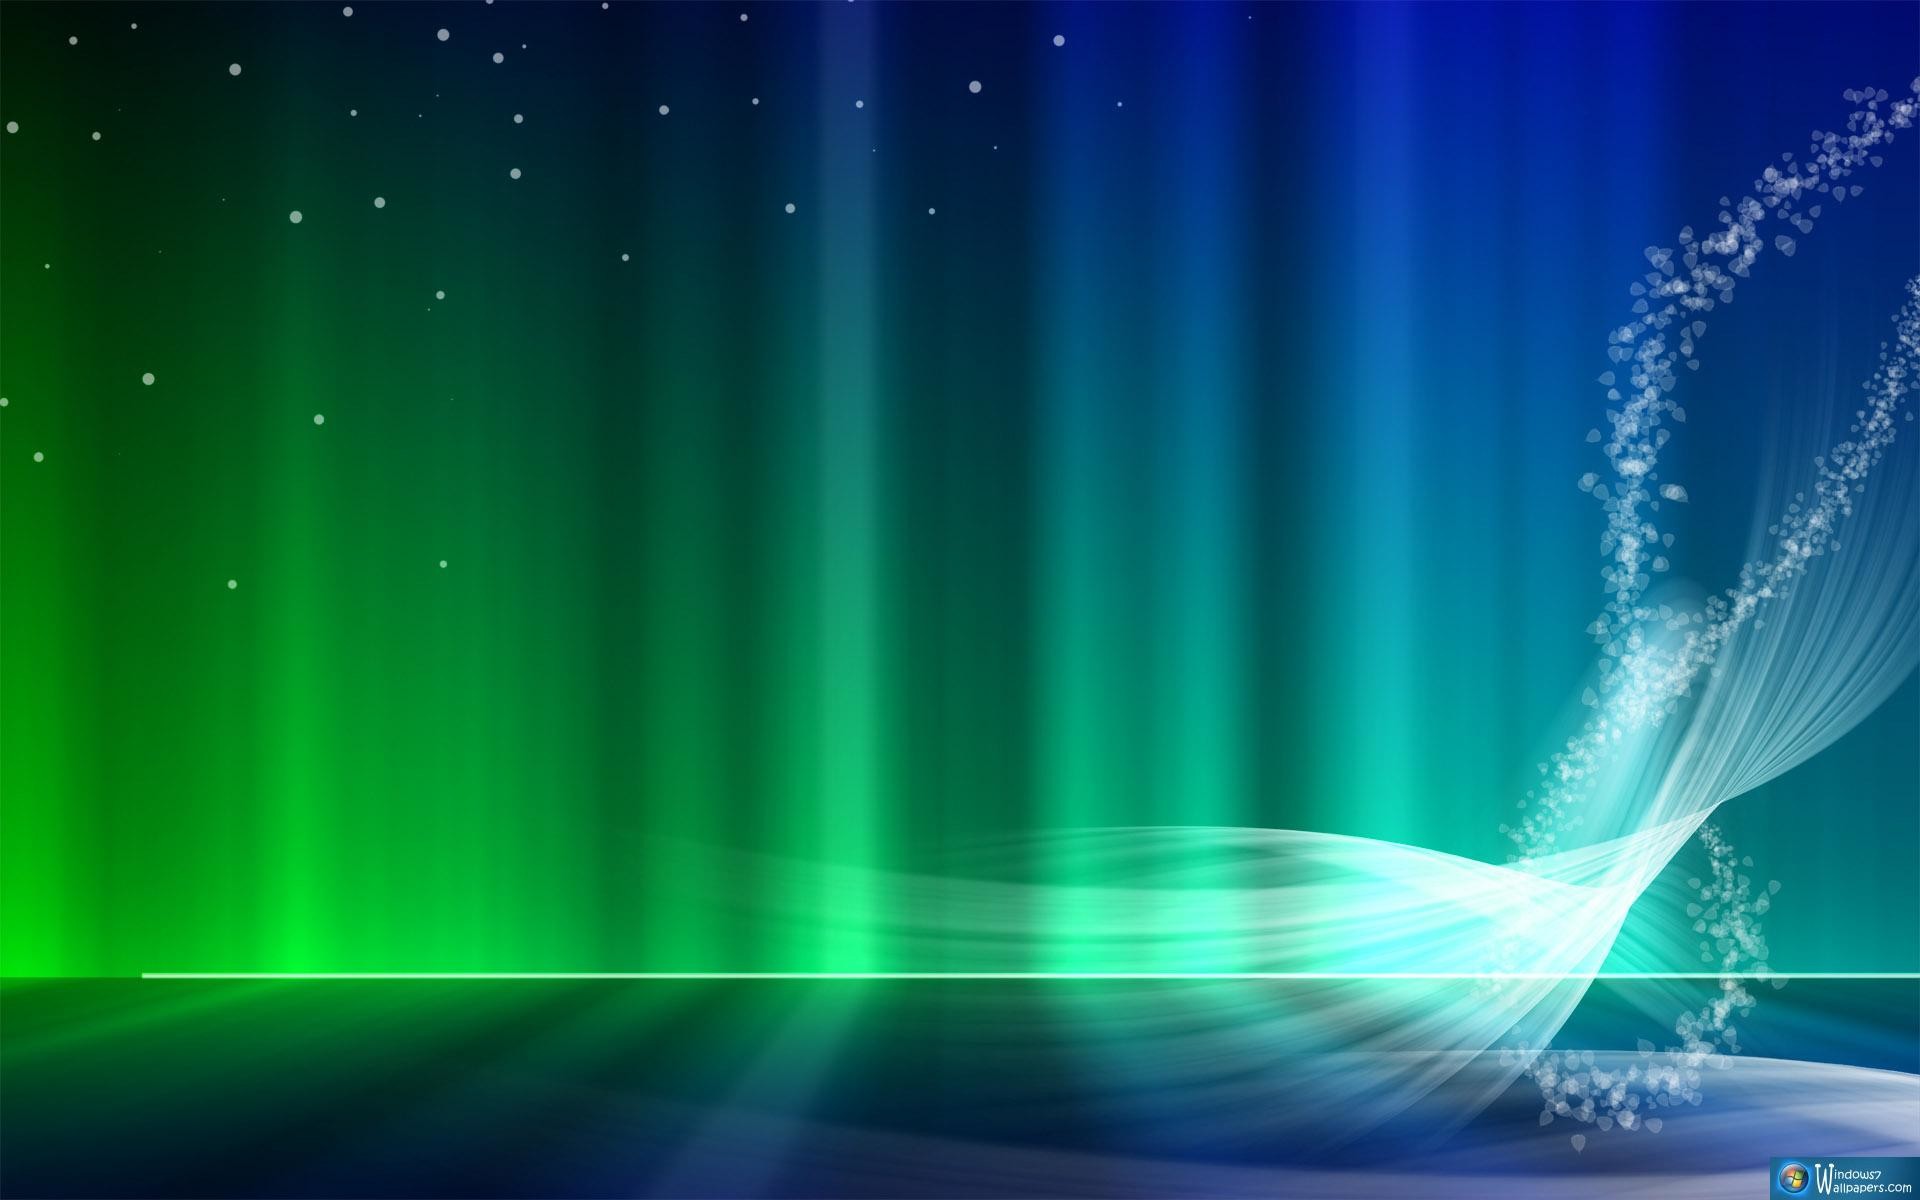 Live Wallpapers To Download For Free 45333 Wallpaper Desktop Live Wallpapers To Download For Free 45333